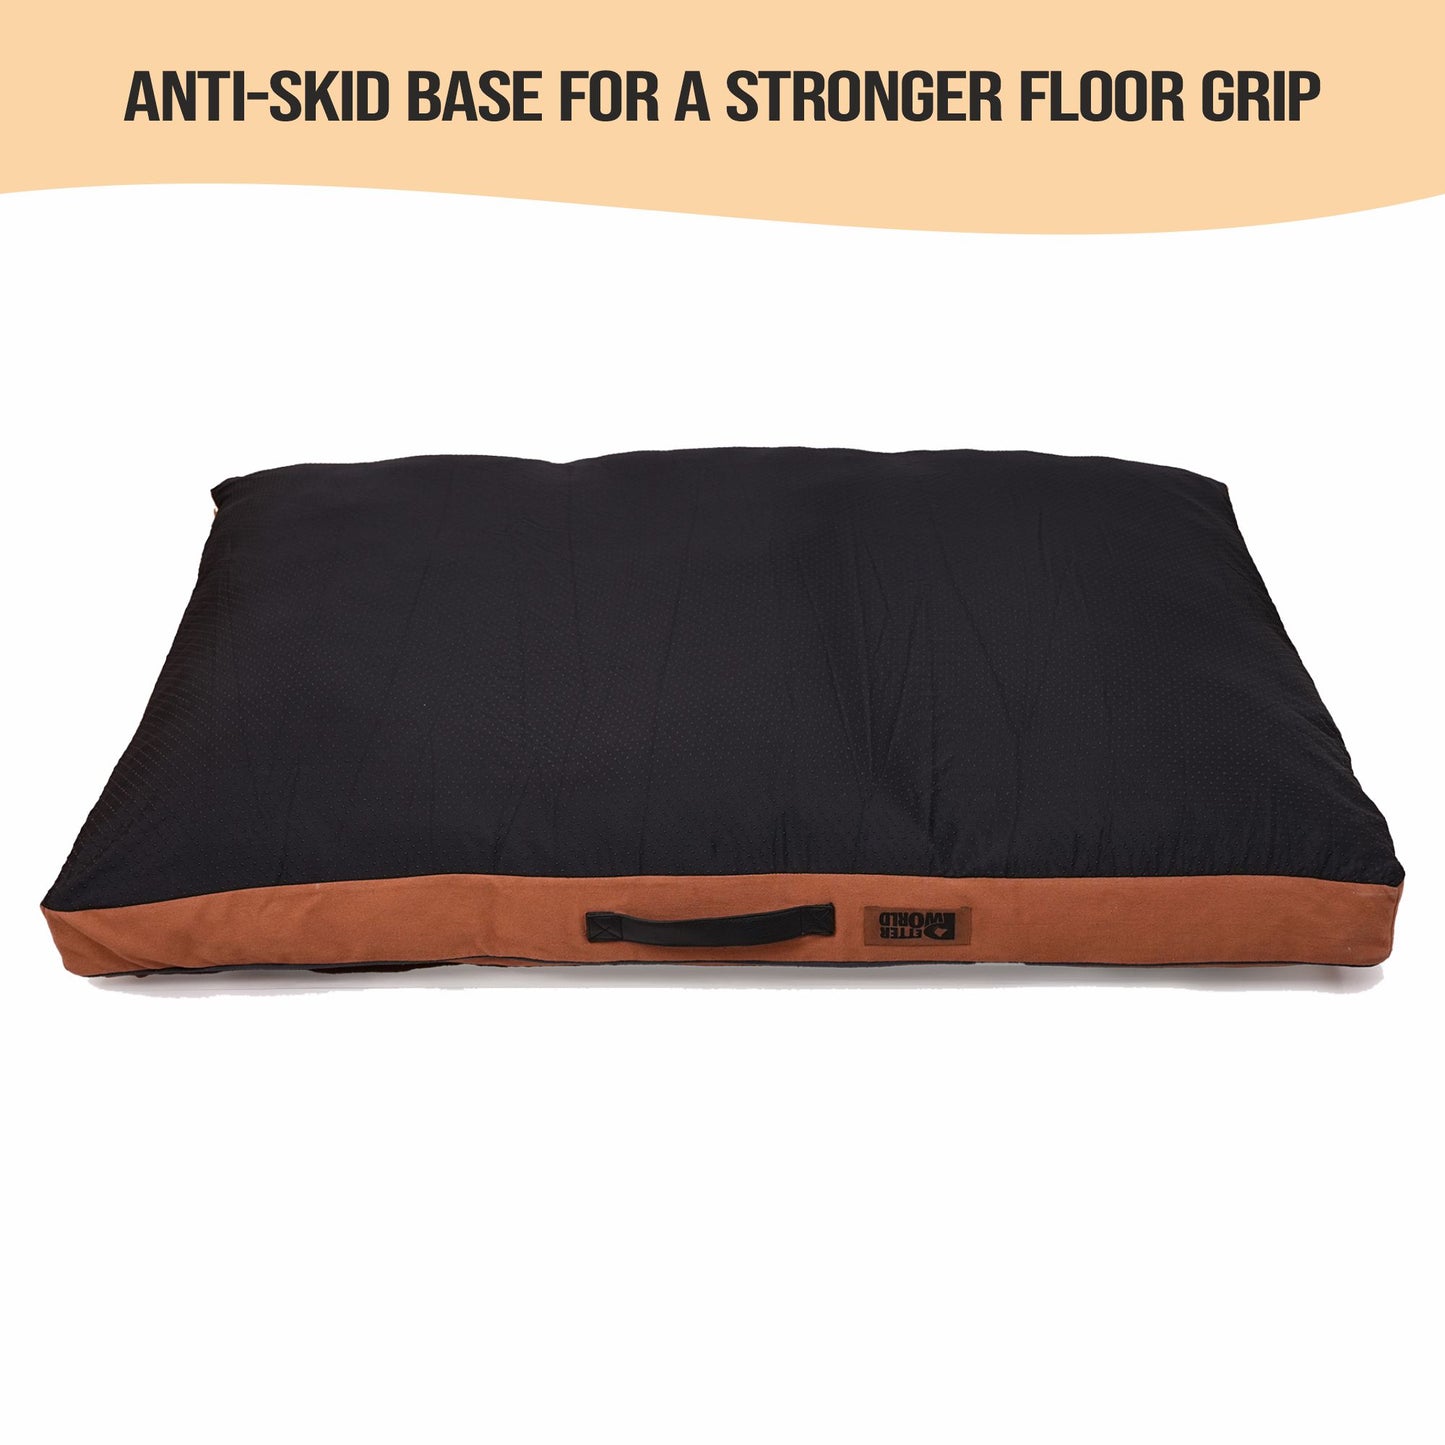 Budget Comfort Cushion Bed